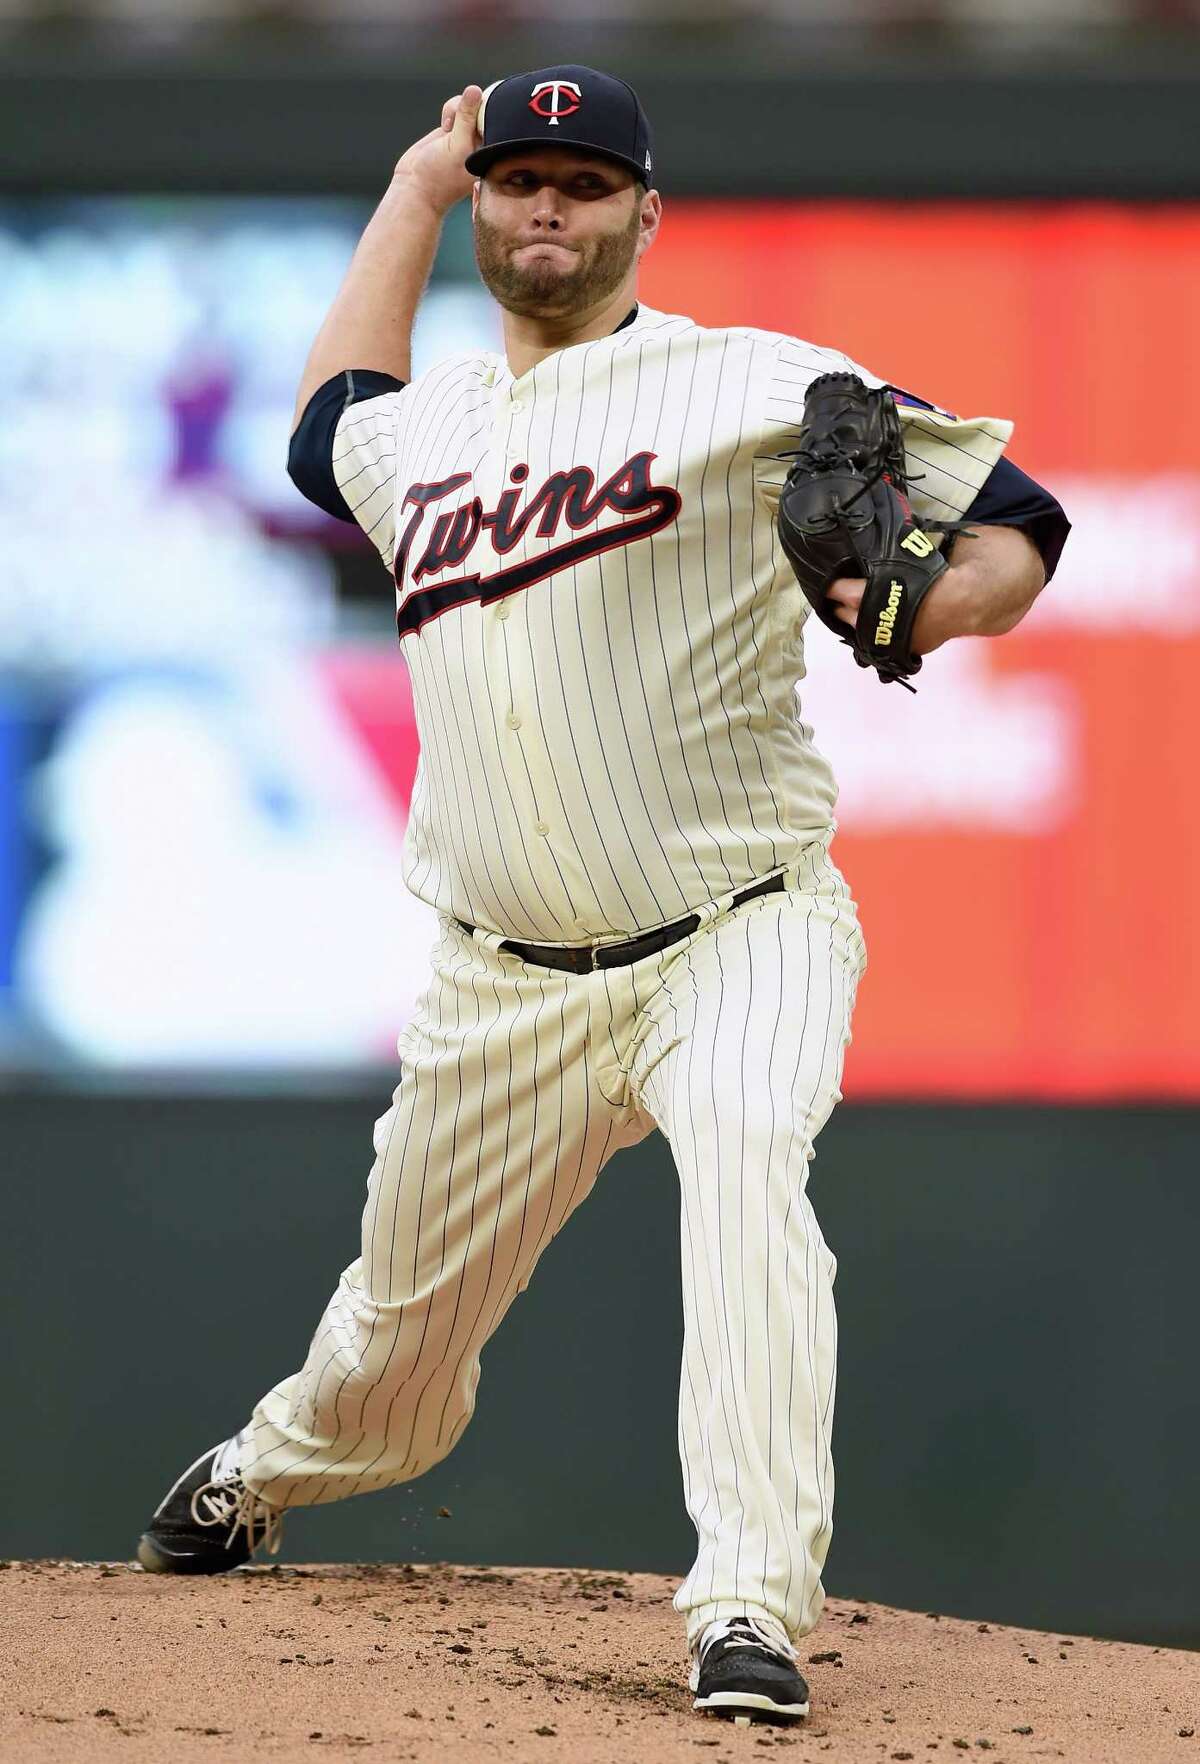 MINNEAPOLIS, MN - JUNE 20: Lance Lynn #31 of the Minnesota Twins delivers a pitch against the Boston Red Sox during the first inning of the game on June 20, 2018 at Target Field in Minneapolis, Minnesota. (Photo by Hannah Foslien/Getty Images)